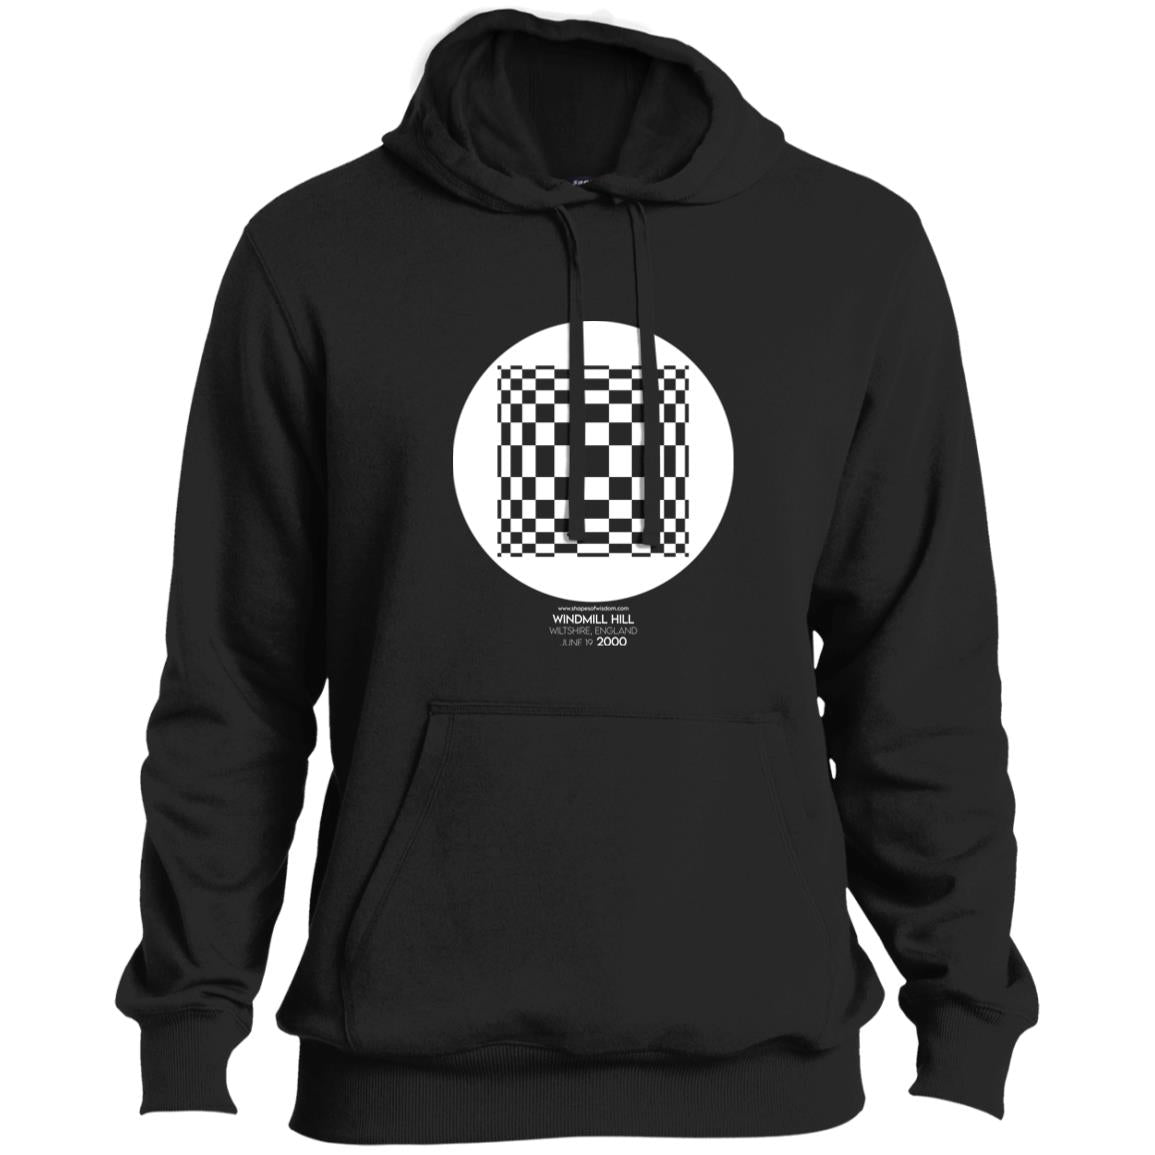 Crop Circle Pullover Hoodie - Windmill Hill 8